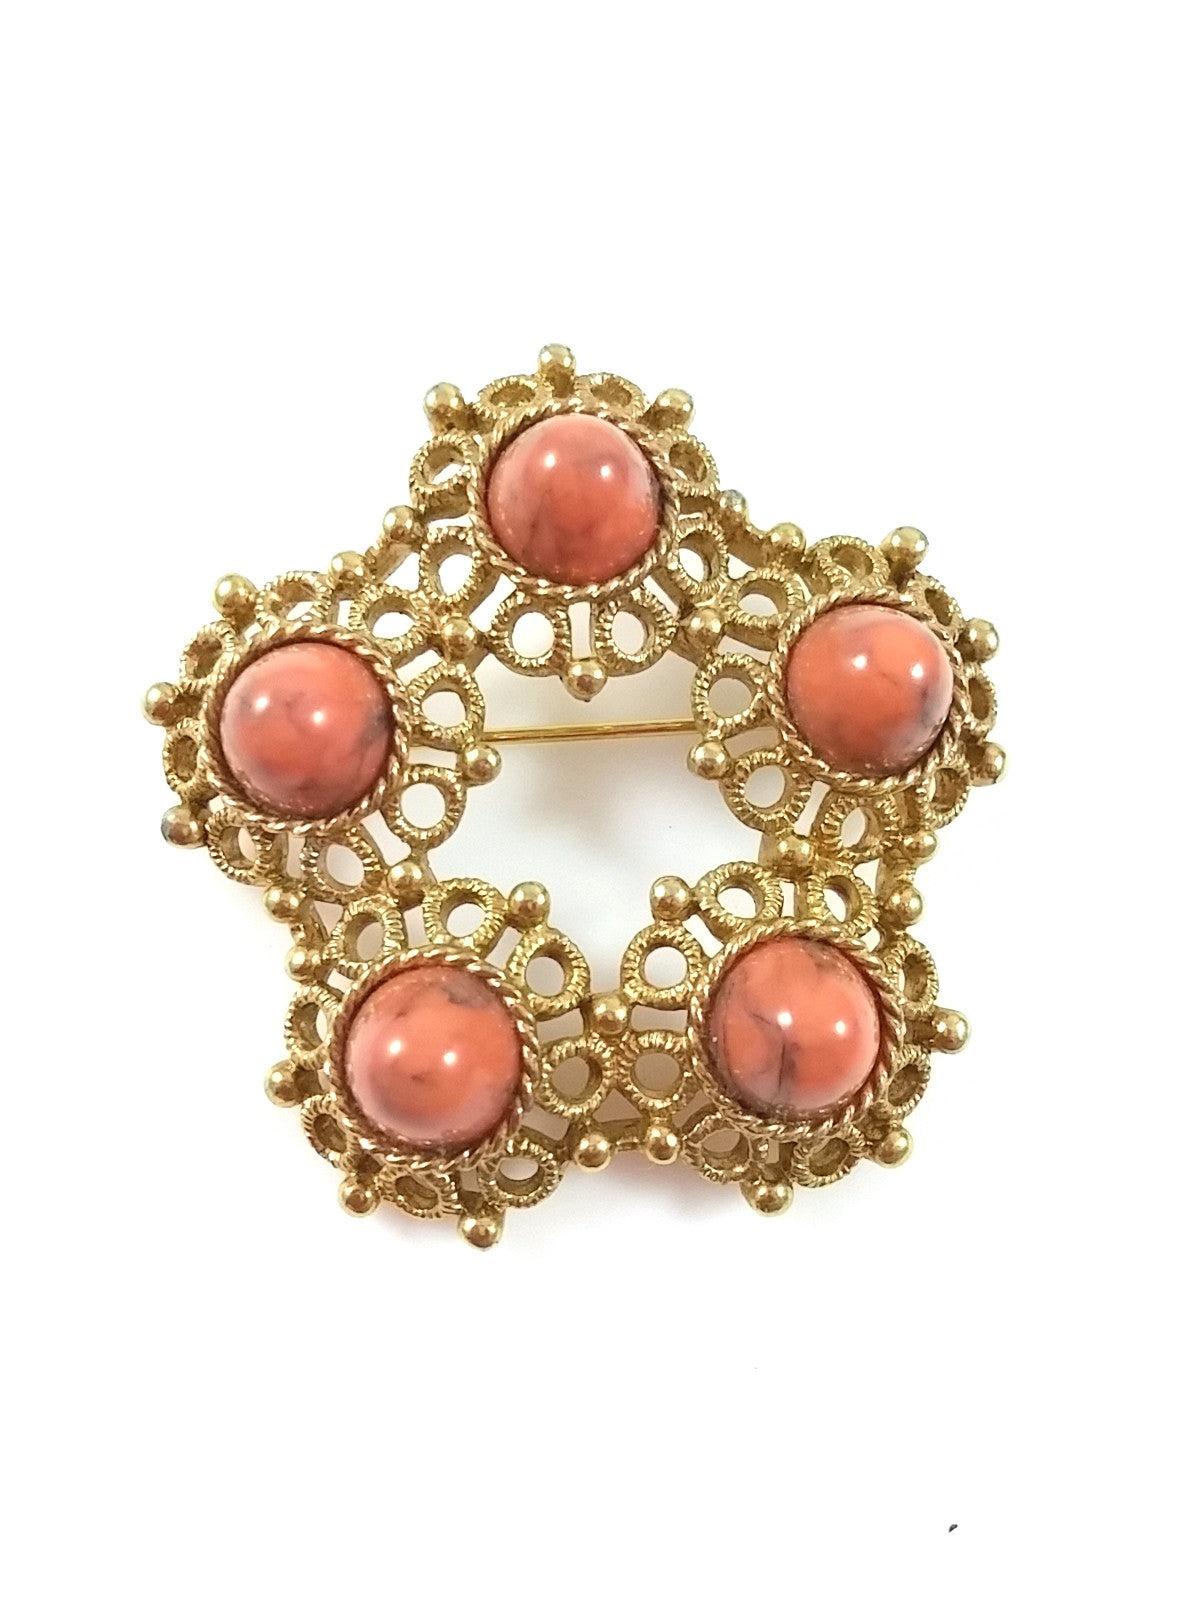 Vintage "Valencia" Brooch by Sarah Coventry circa 1970 - Dirty 30 Vintage | Vintage Clothing, Vintage Jewelry, Vintage Accessories